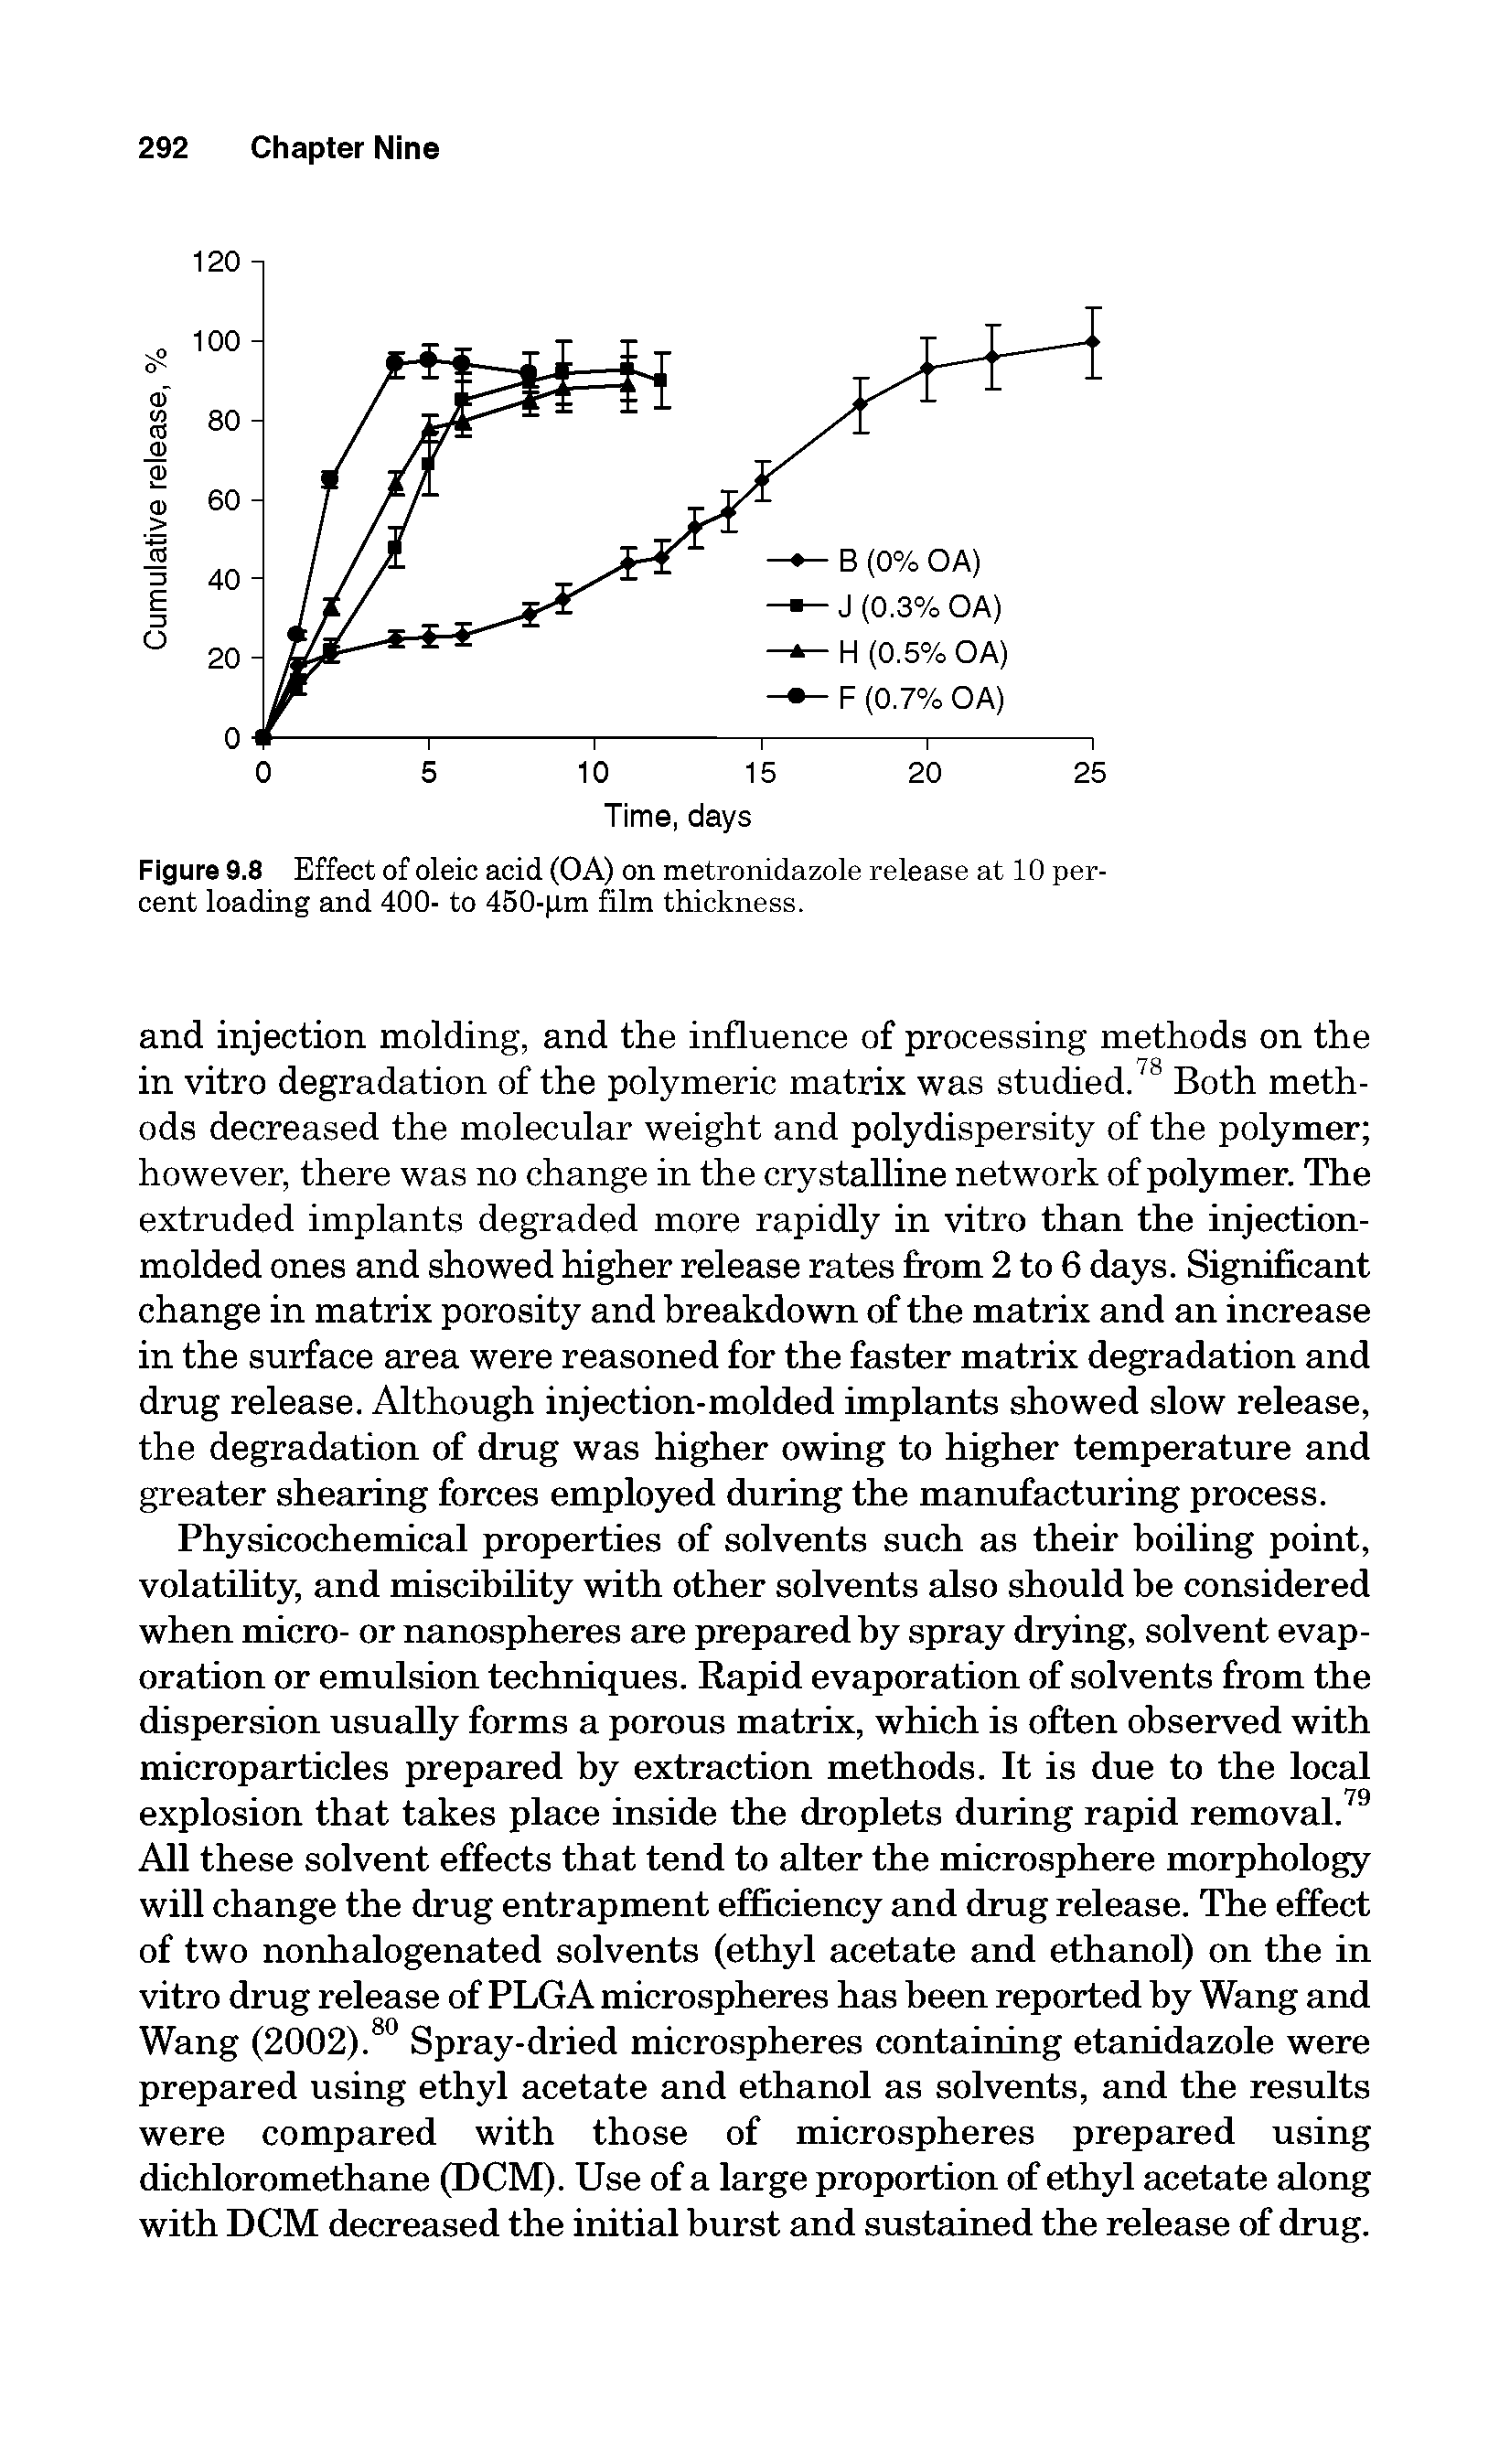 Figure 9.8 Effect of oleic acid (OA) on metronidazole release at 10 percent loading and 400- to 450-gm film thickness.